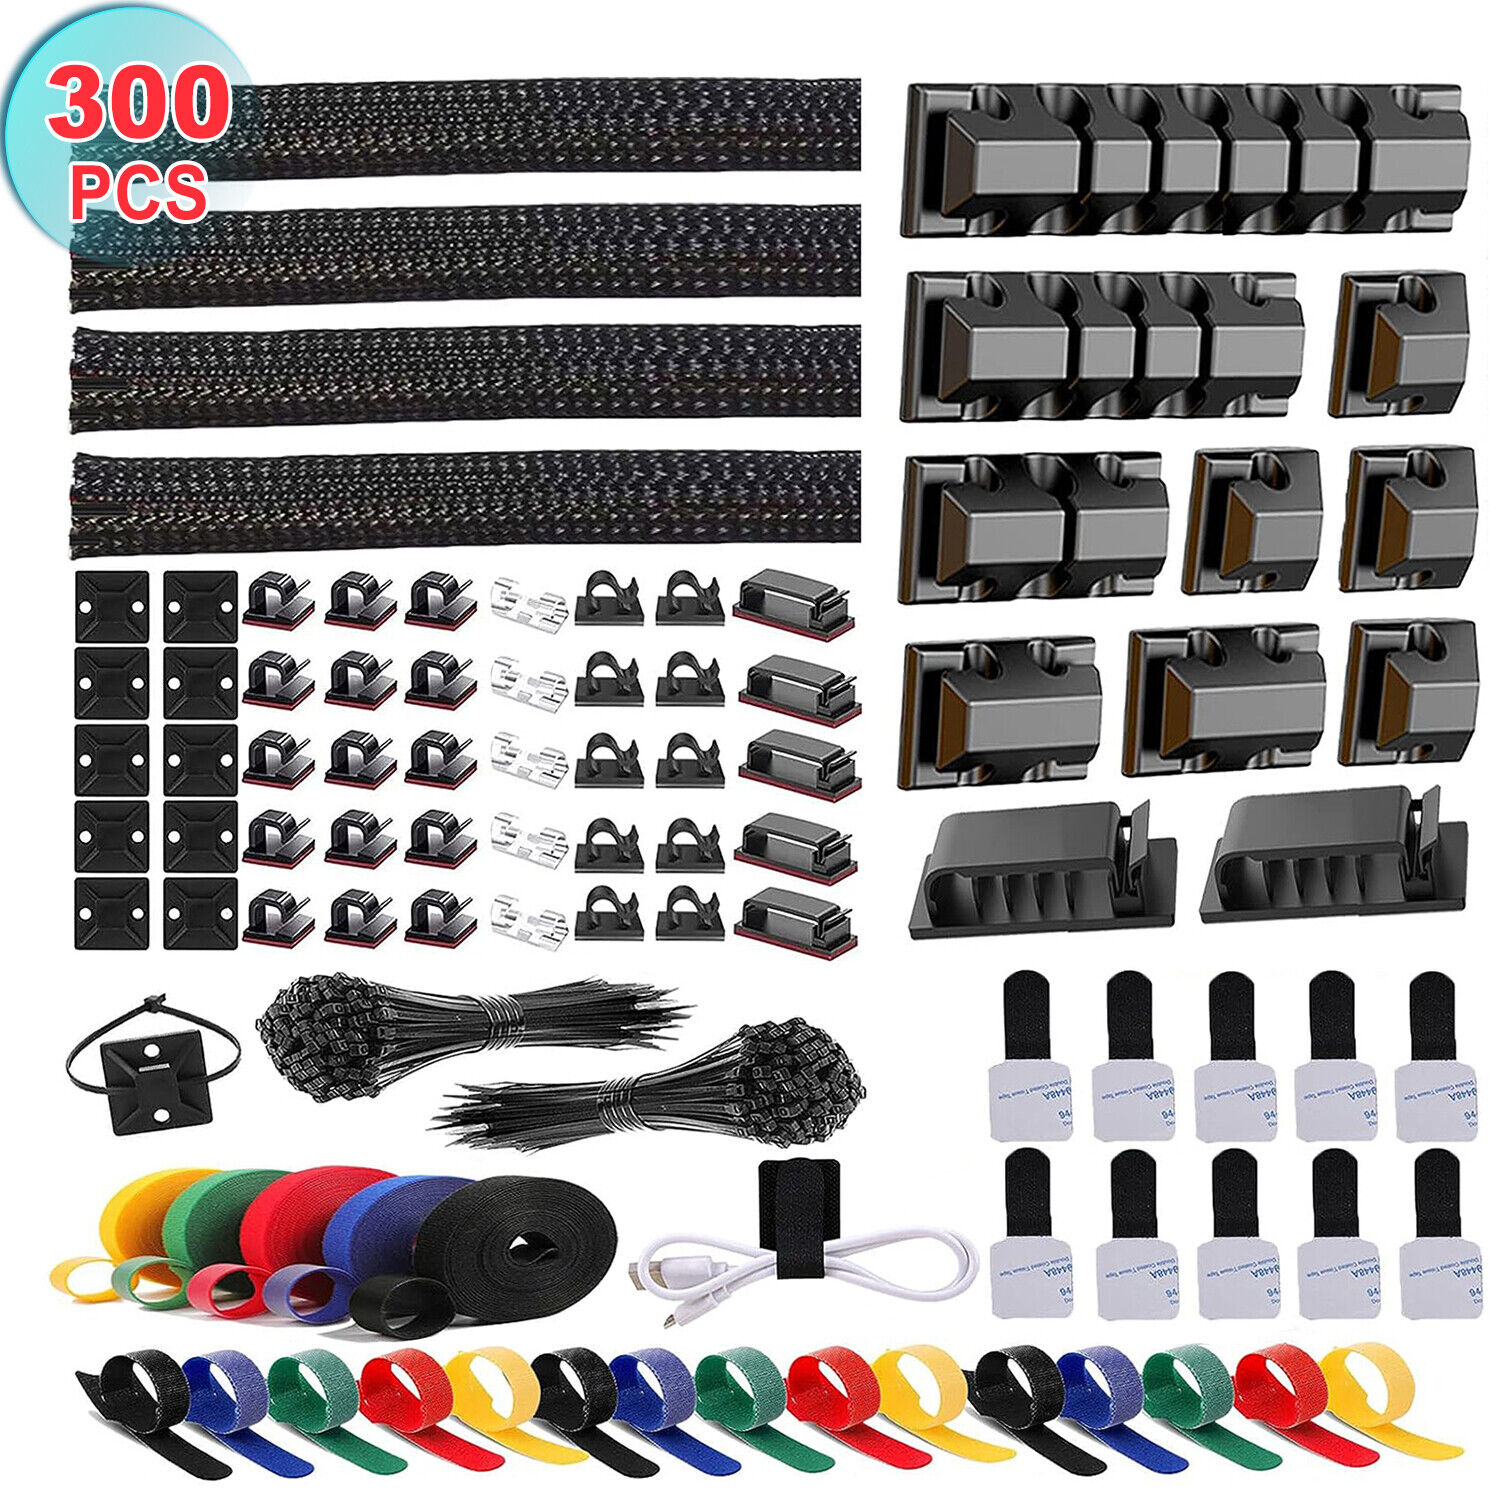 300Pcs Cable Management Kit Wire/Cord Organizer Zip Ties Holder Clips Adhesive